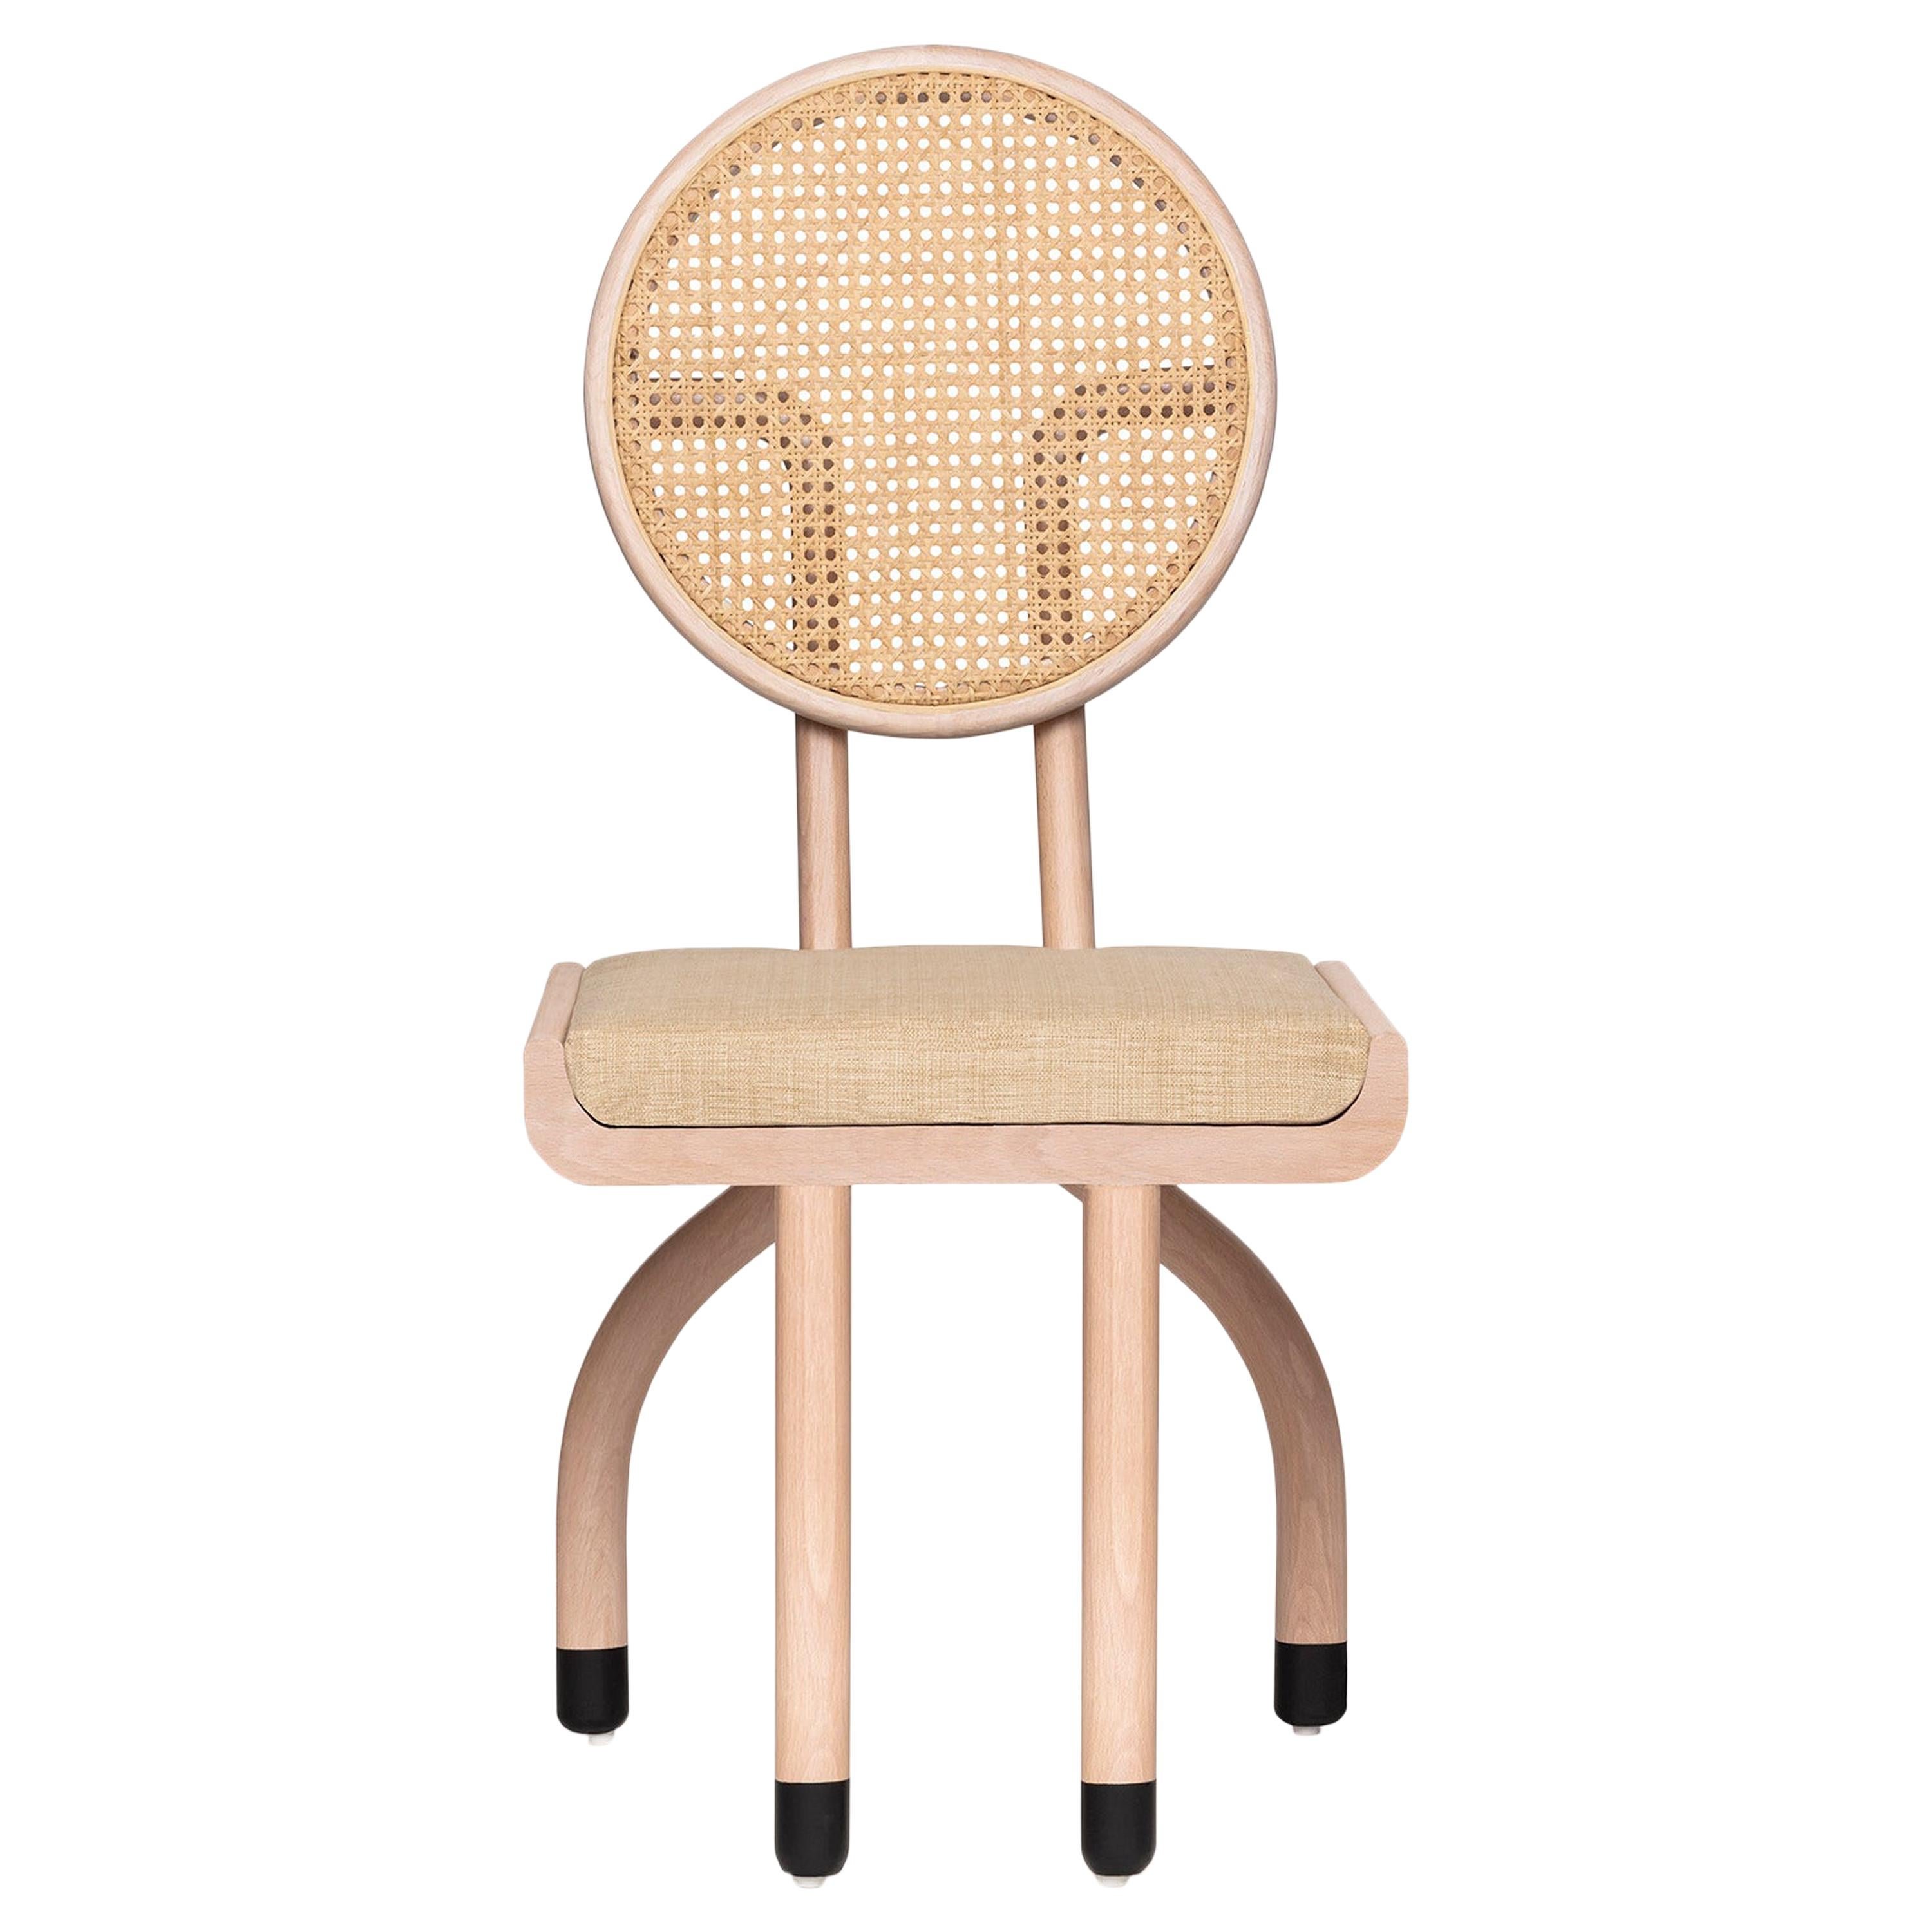 Mid-Century Modern Style Solid Minimal Wood Chair with Woven Cane Backboard For Sale